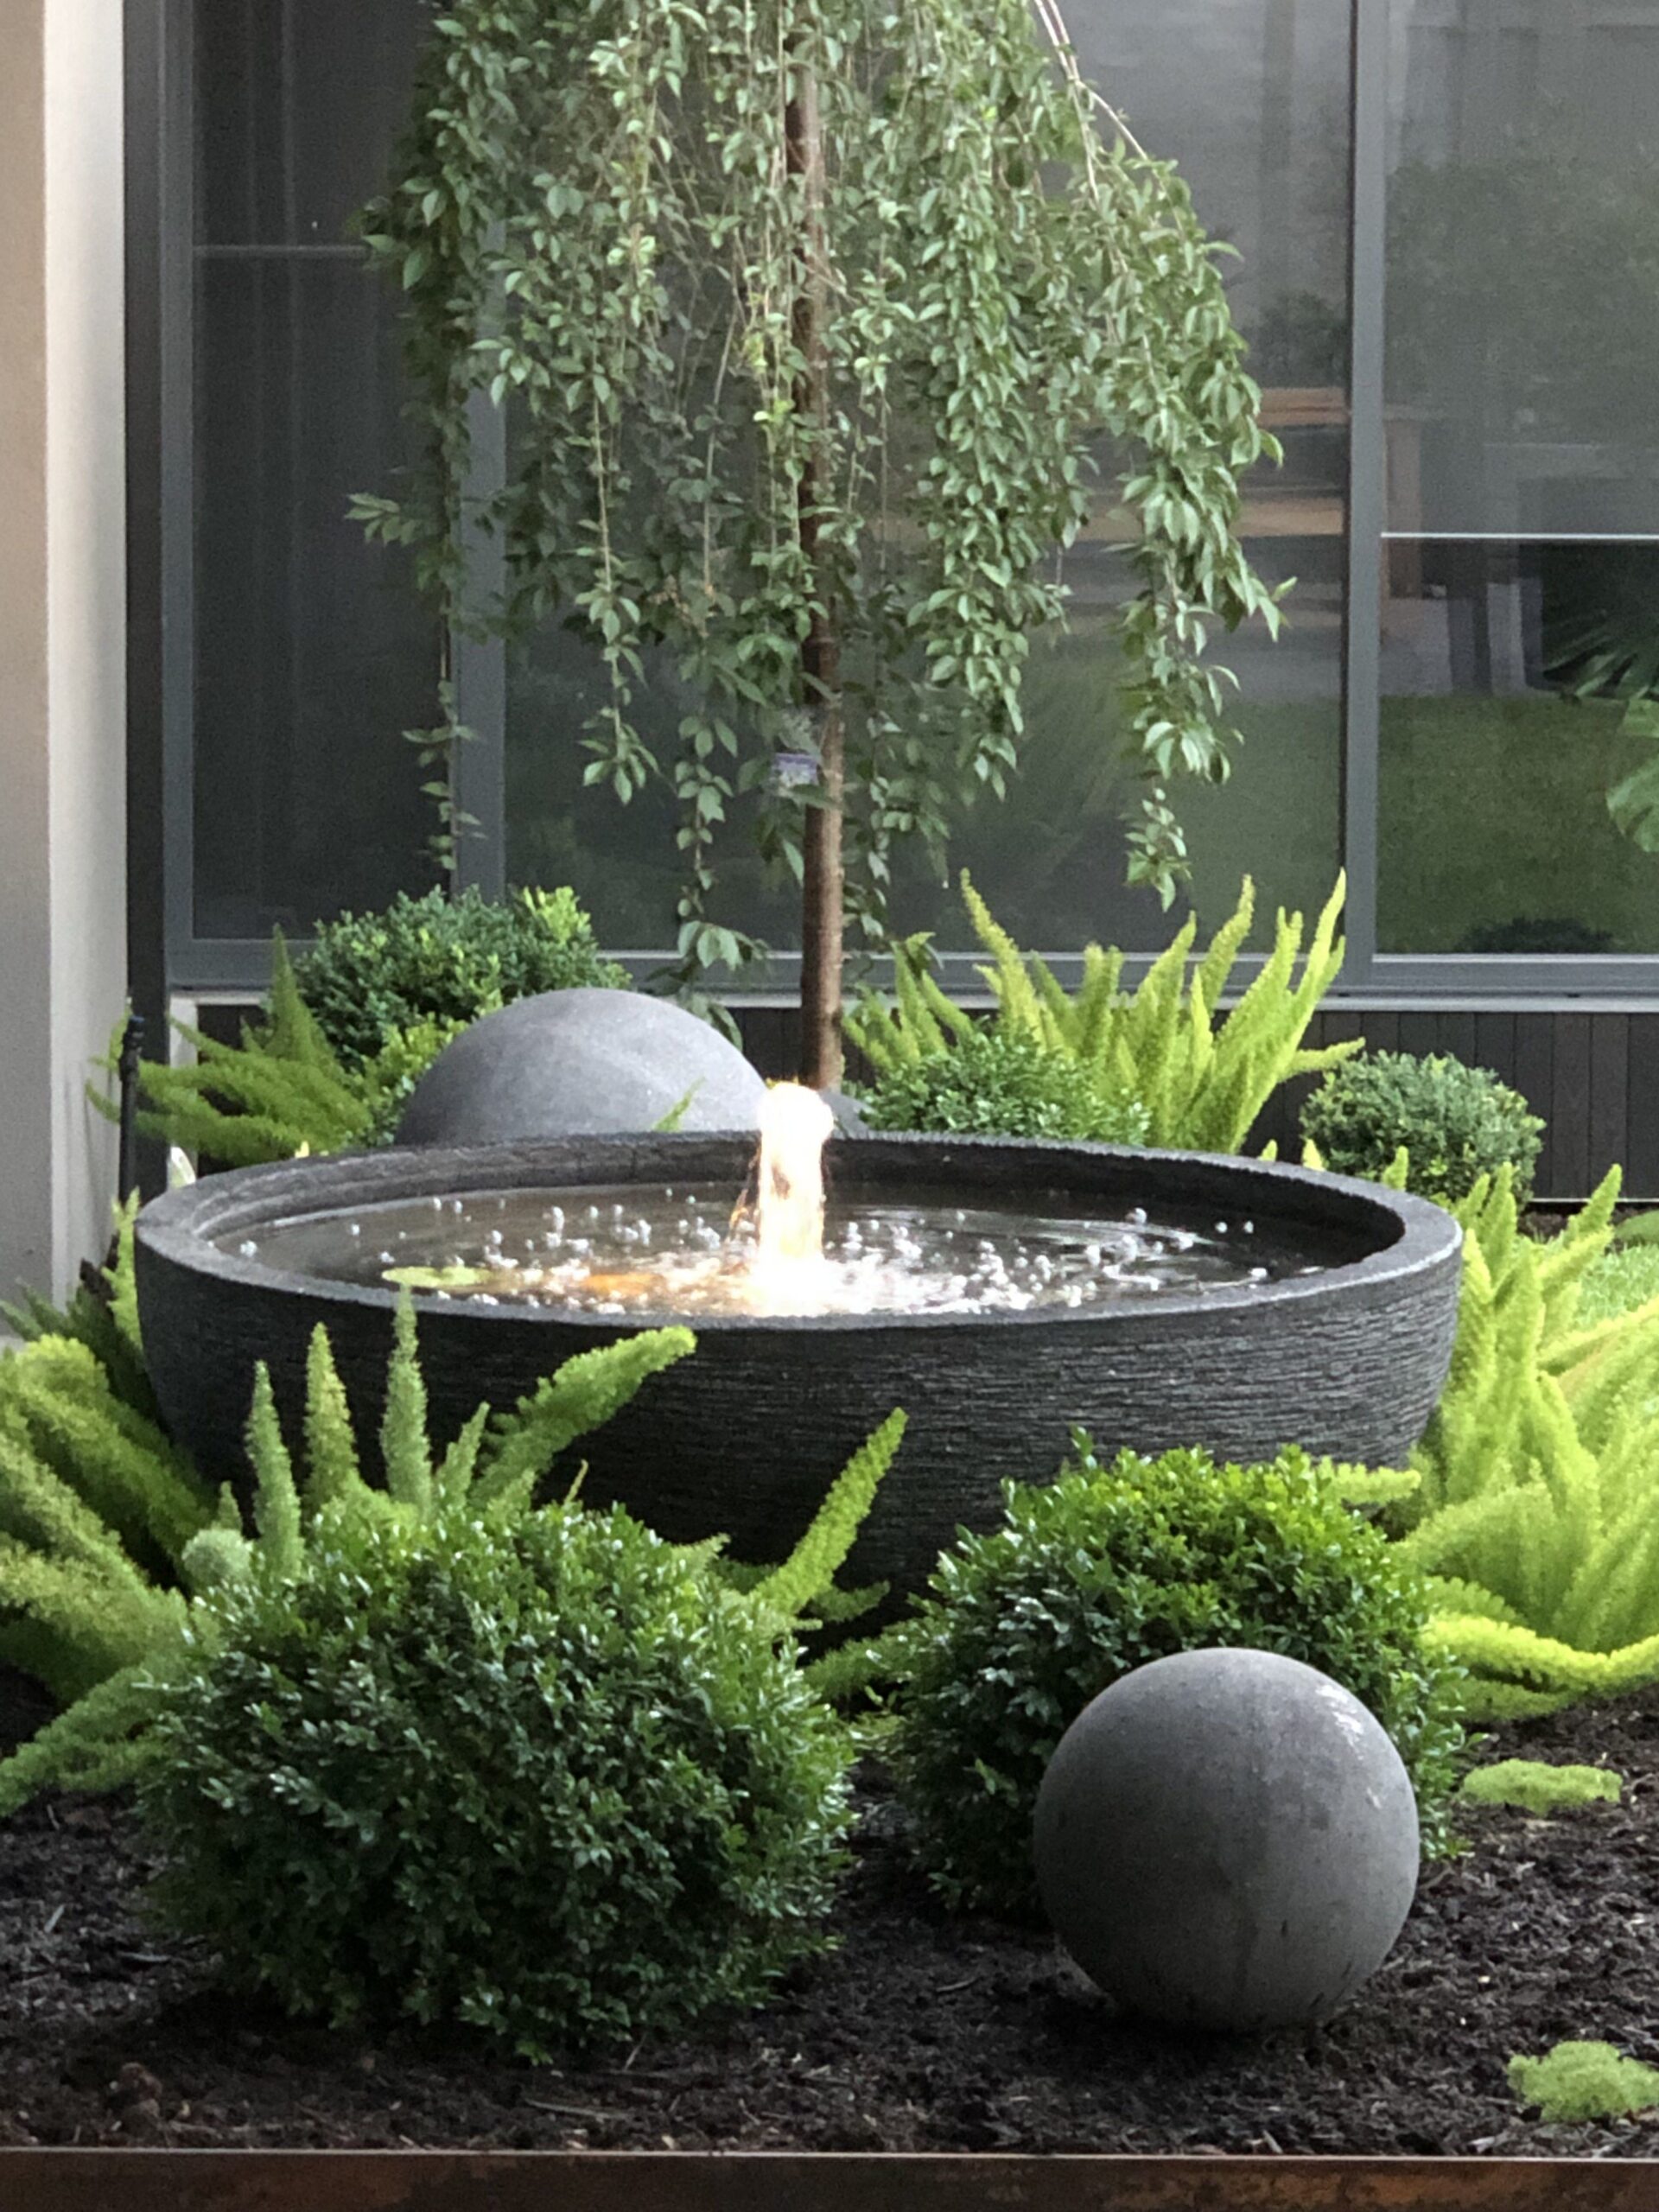 Creating a Beautiful Garden with Stone Accents